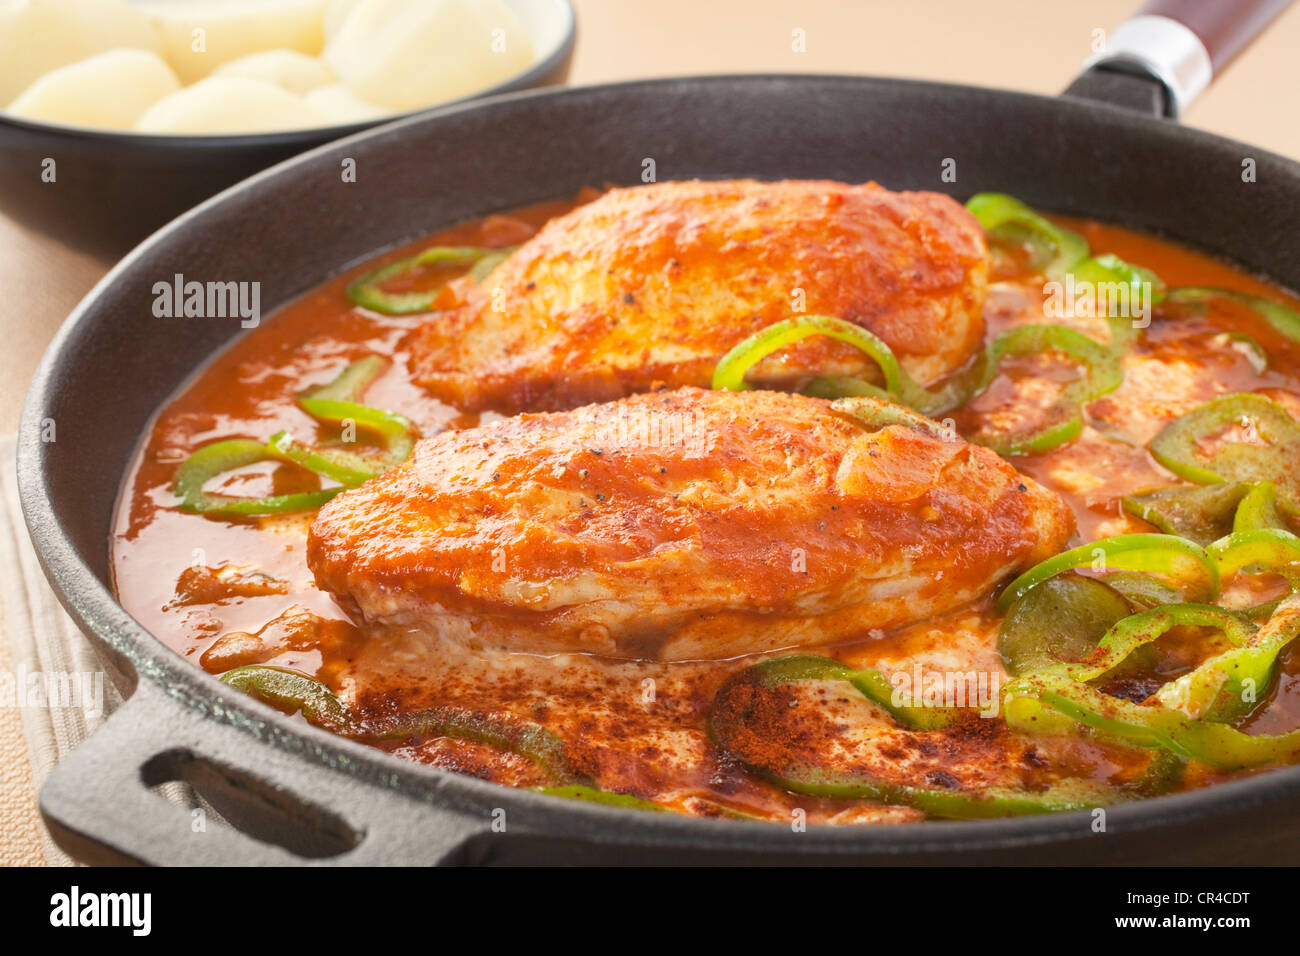 A warm winter meal, chicken paprika has a sauce made from onion, paprika, tomato and green capsicum, Stock Photo